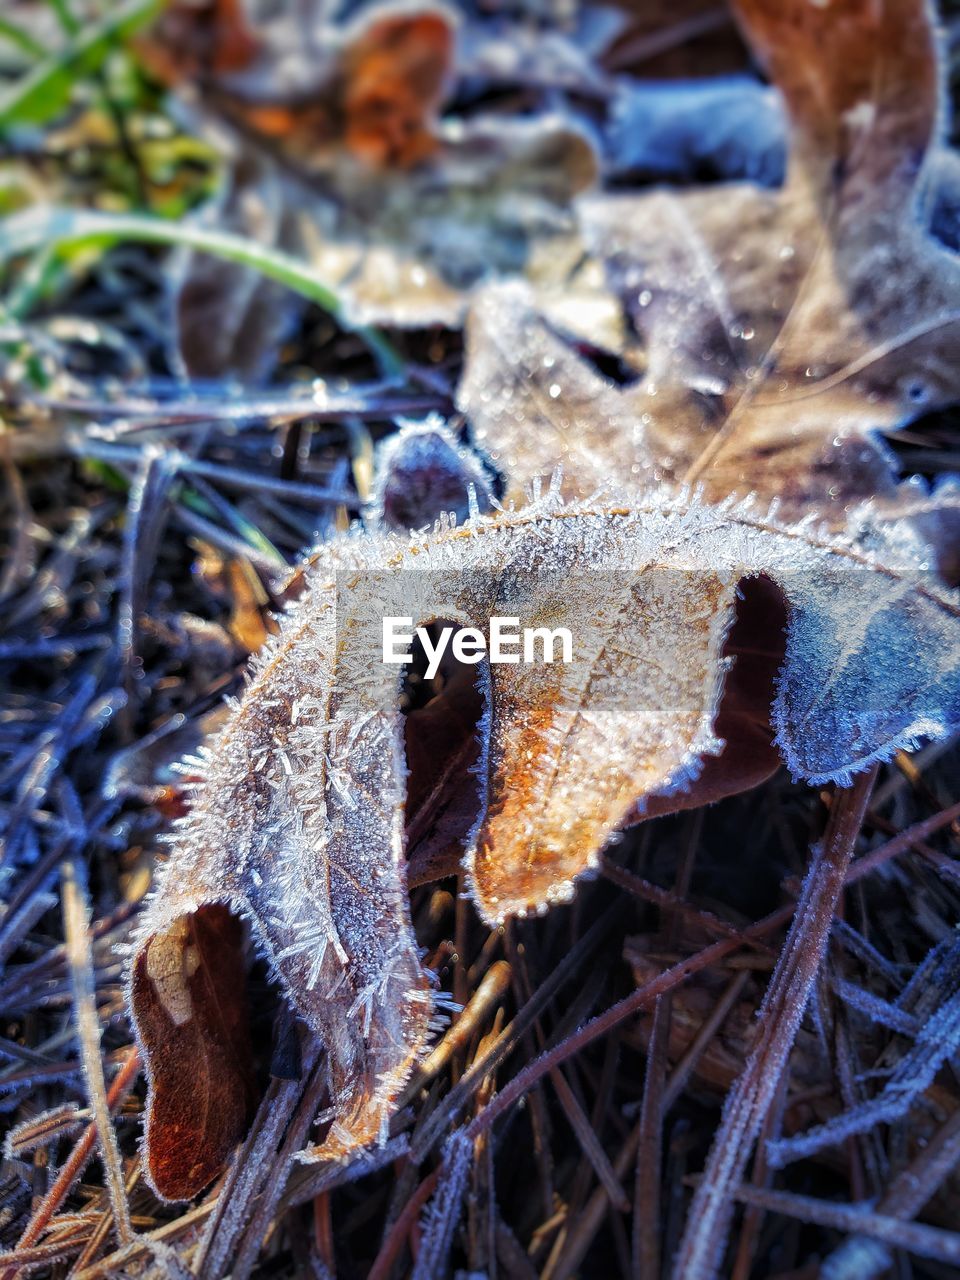 CLOSE-UP OF FROZEN DRY PLANT ON FIELD